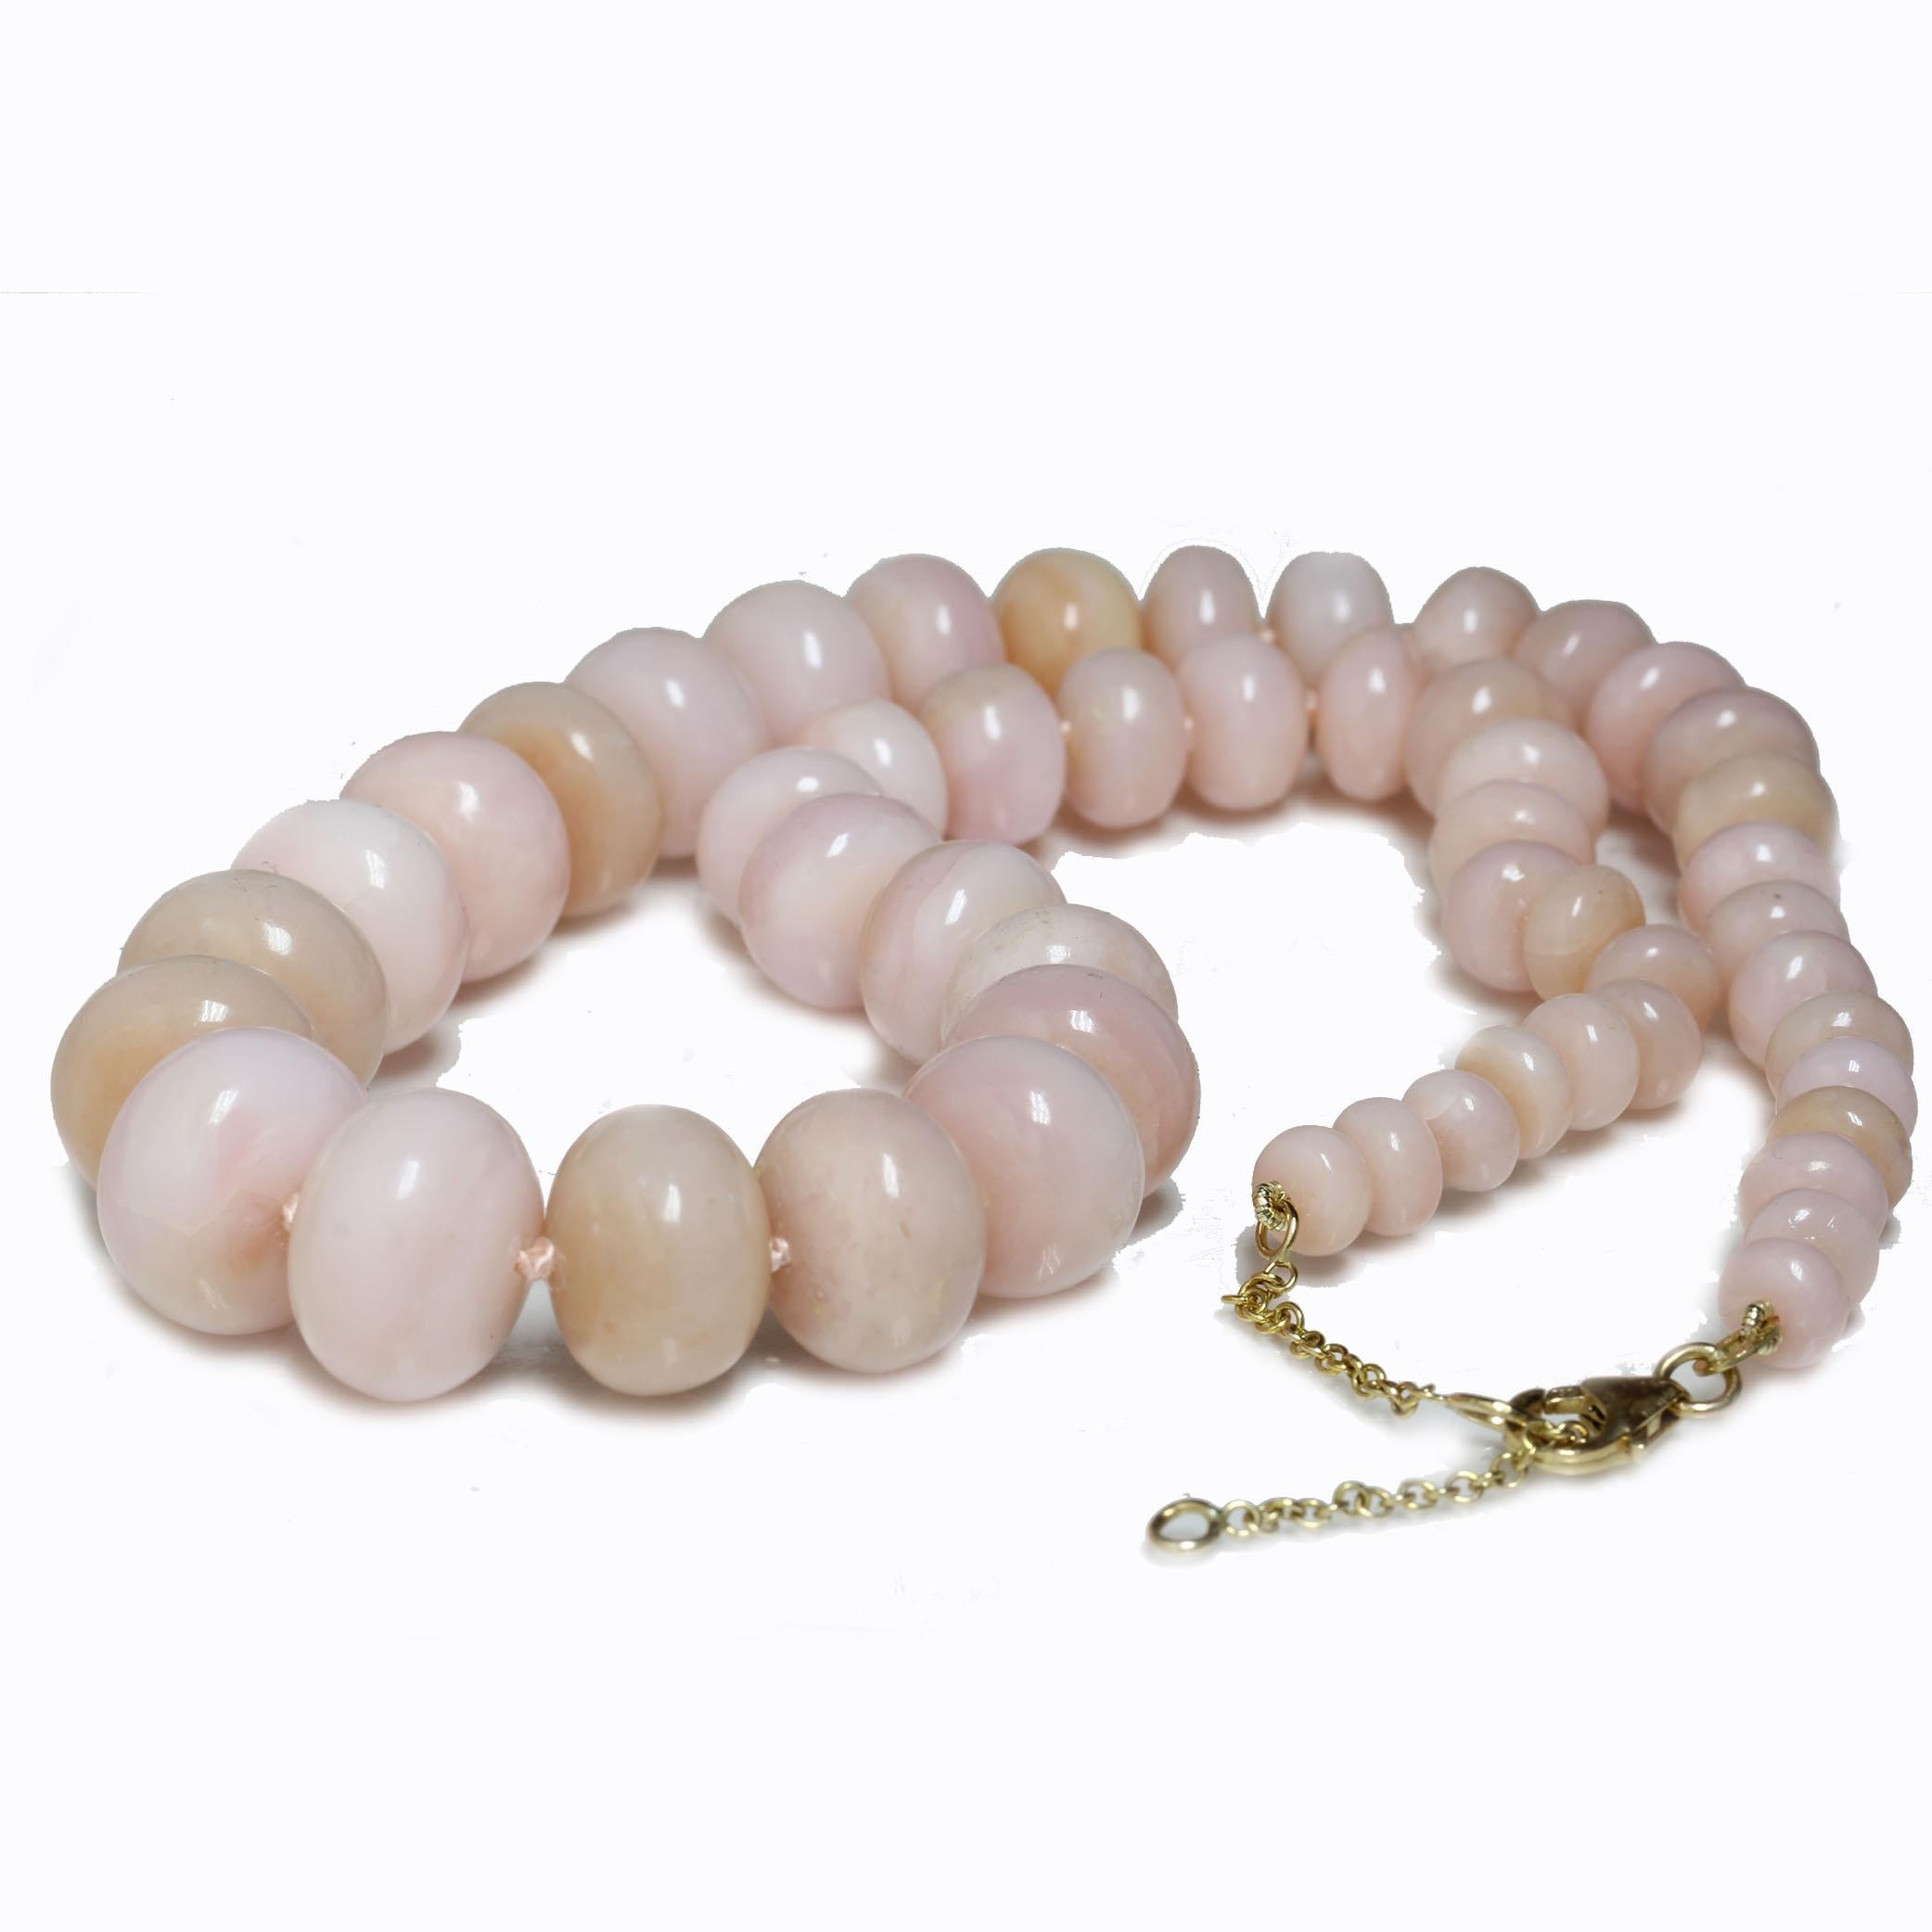 Add a gorgeous dash of color to your neckline with these stunning genuine Pink Opal beads. A unique statement piece, but also versatile enough to wear with almost anything.  The necklace is rare size and graduate from 15.5 - 6.5mm hand knotted with